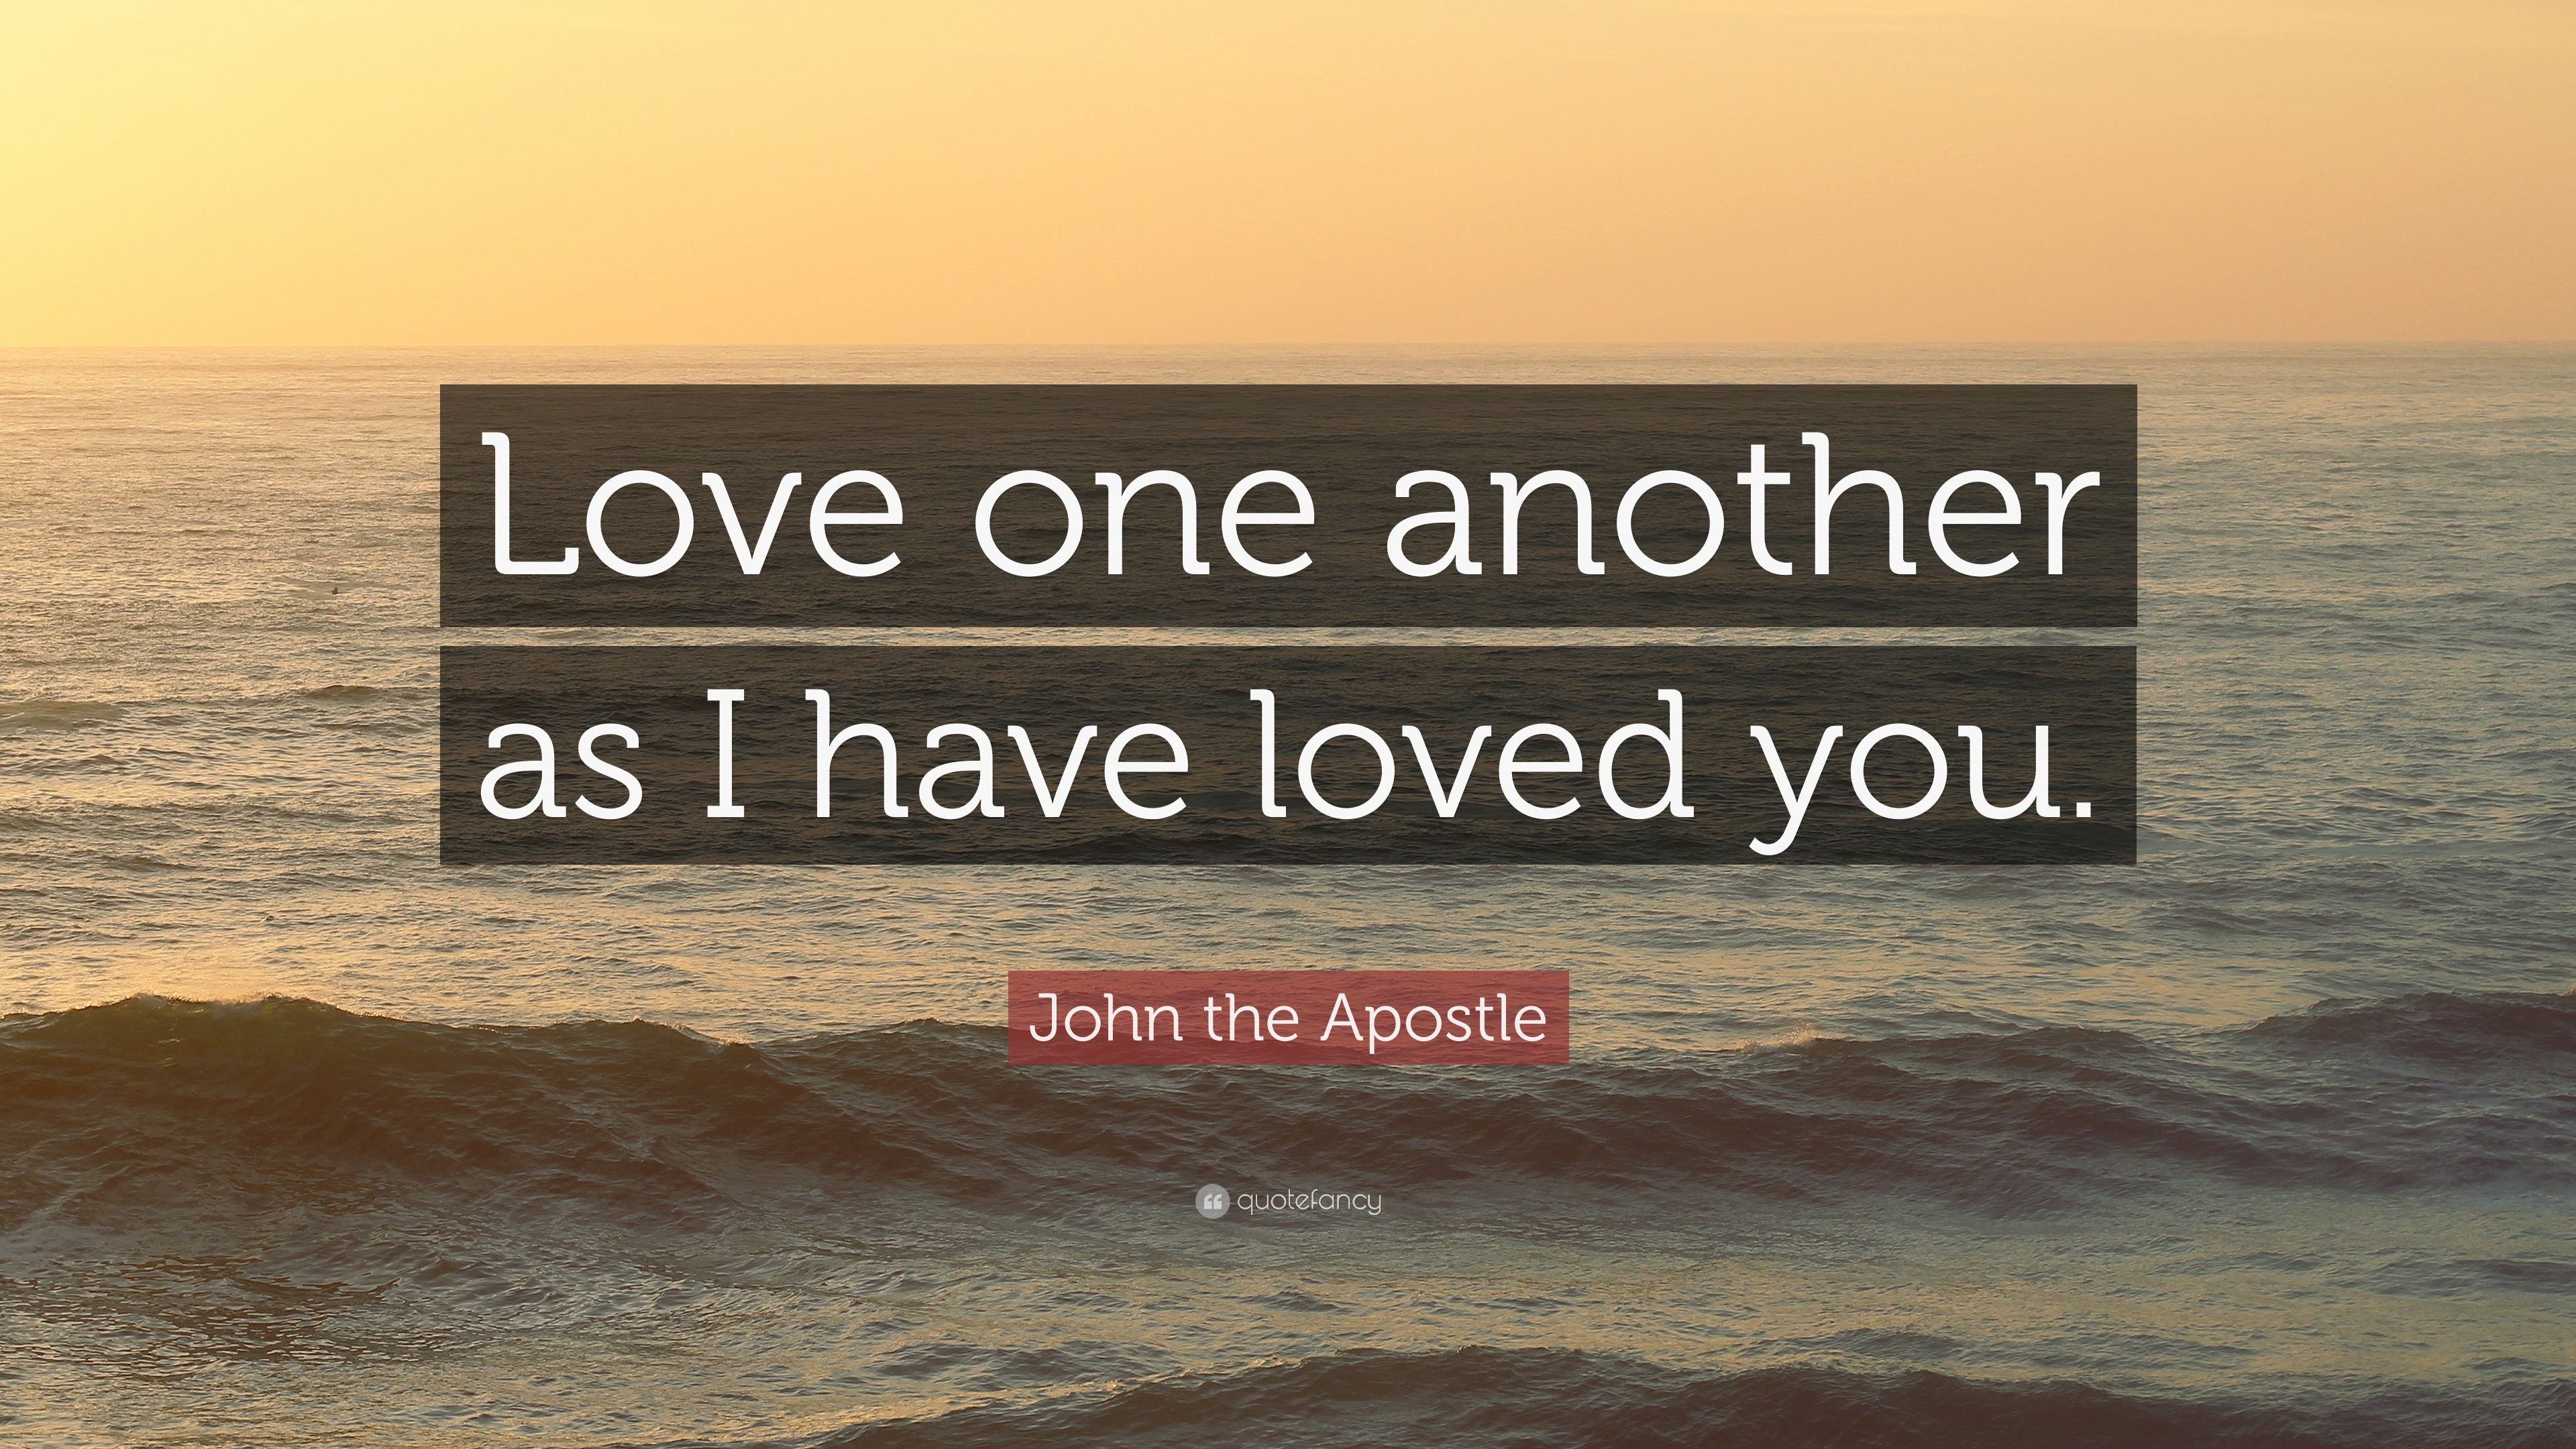 John the Apostle Quote: “Love one another as I have loved you.”